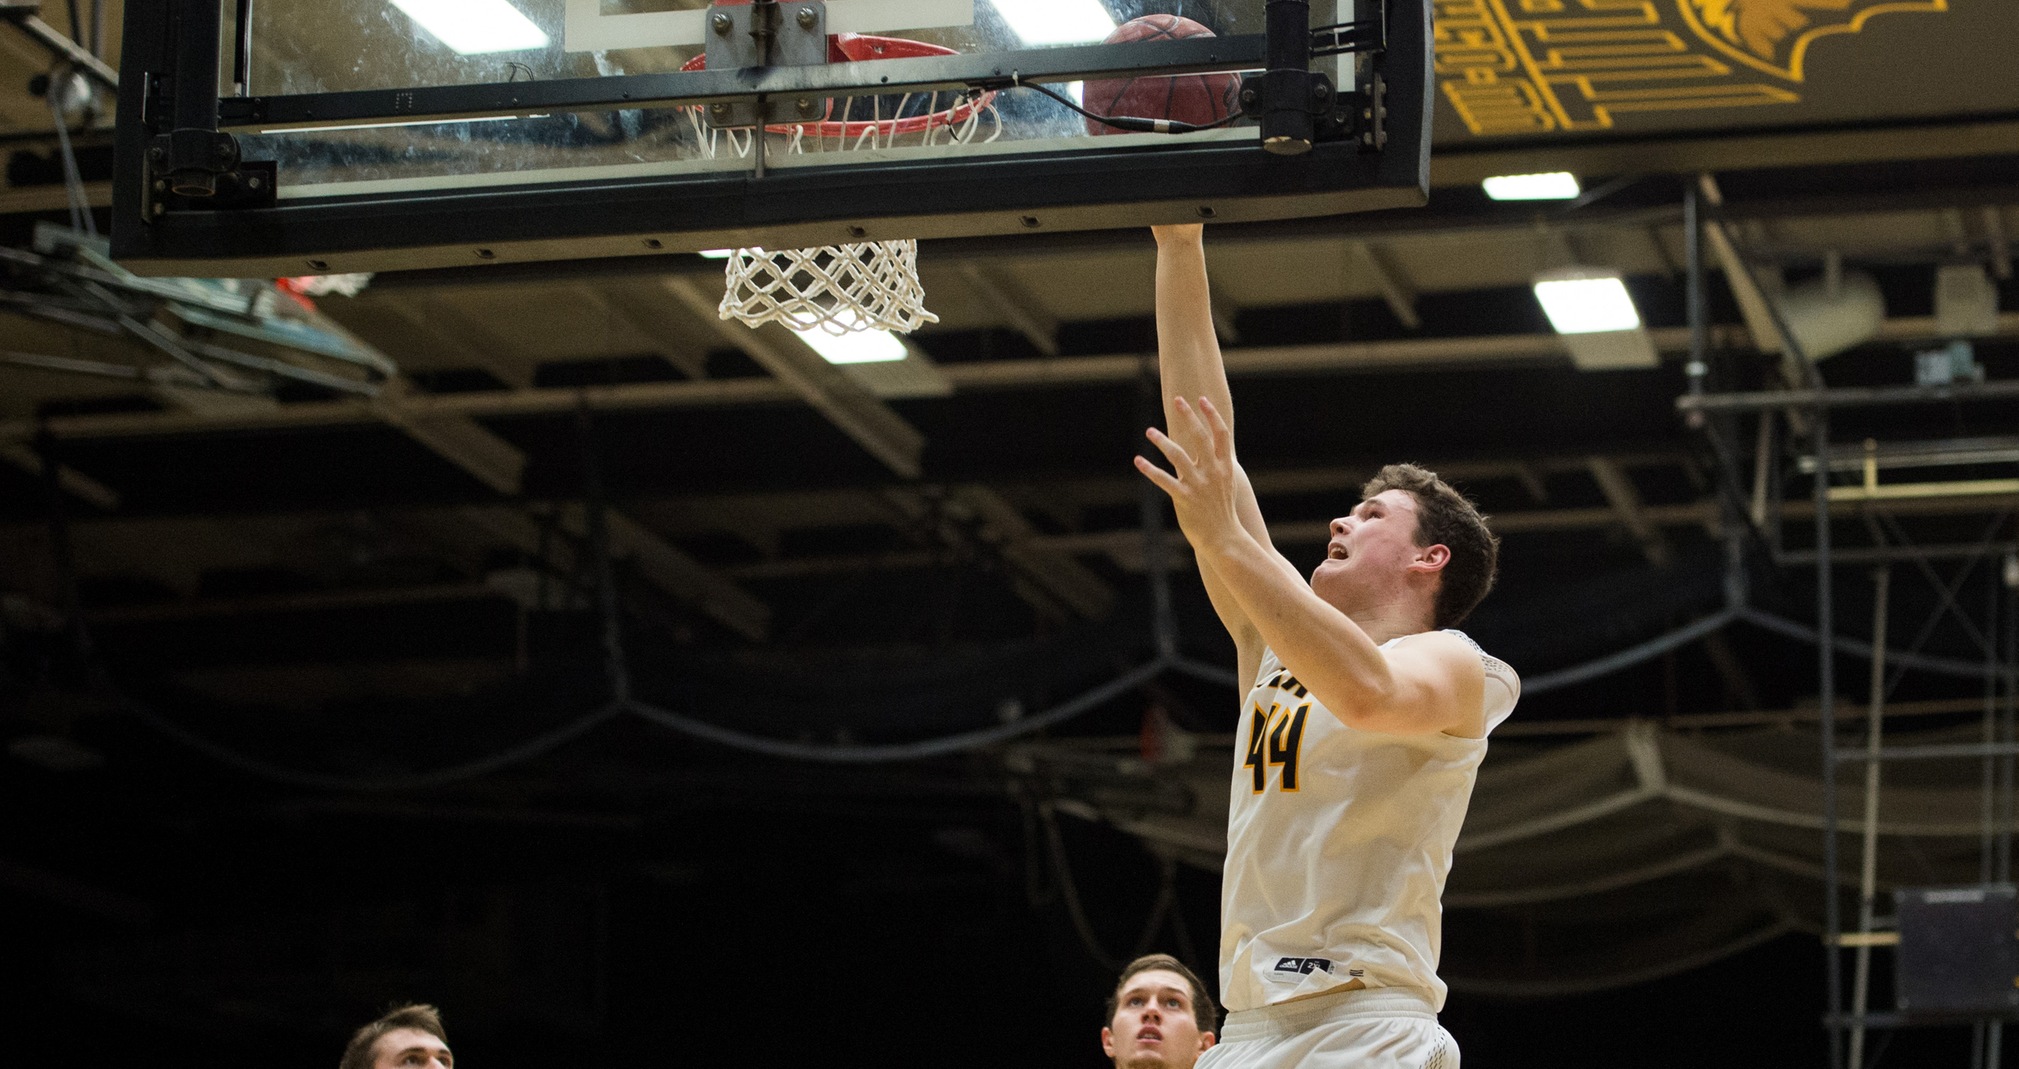 Jack Flynn scored 12 points and collected six rebounds during his 16 minutes of activity against the Eagles.